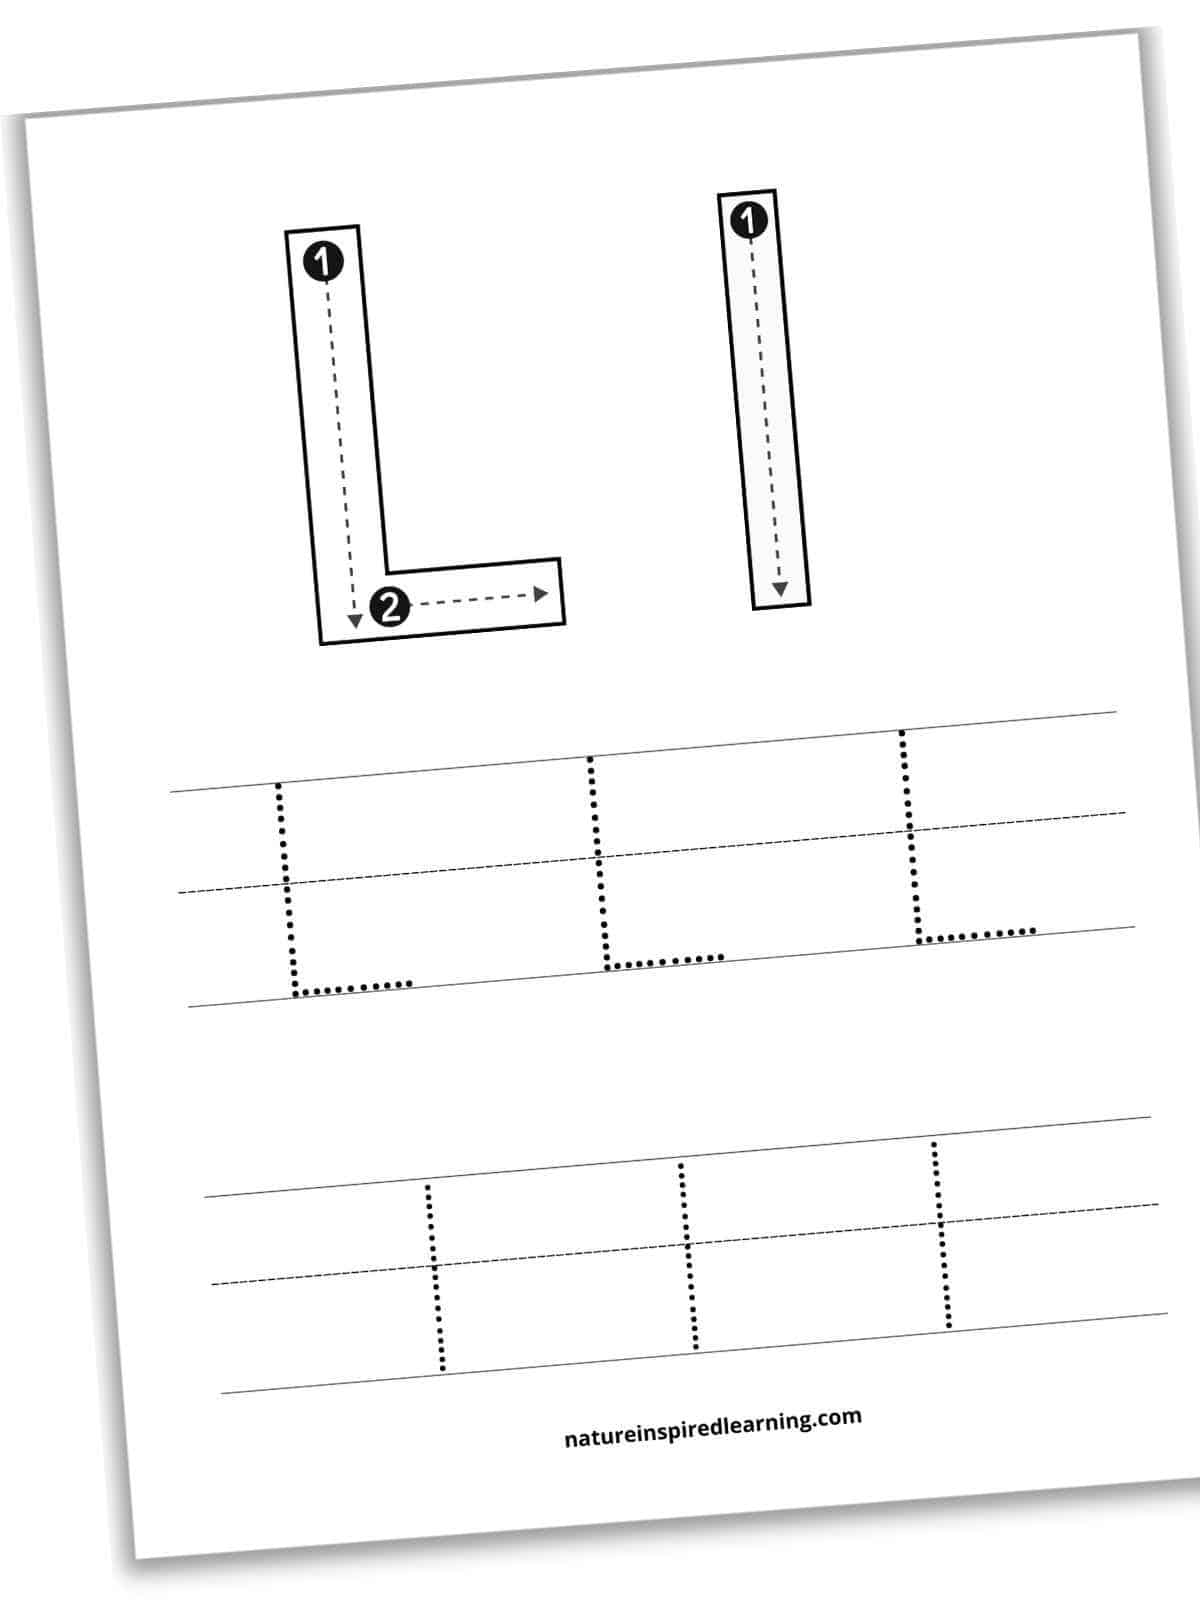 Black and white worksheet with large L and l on the top half in outline form with guidelines, numbers, and arrows within each letter. One set of lines below with three L's in dotted font with another set of lines below with three l's in dotted font.